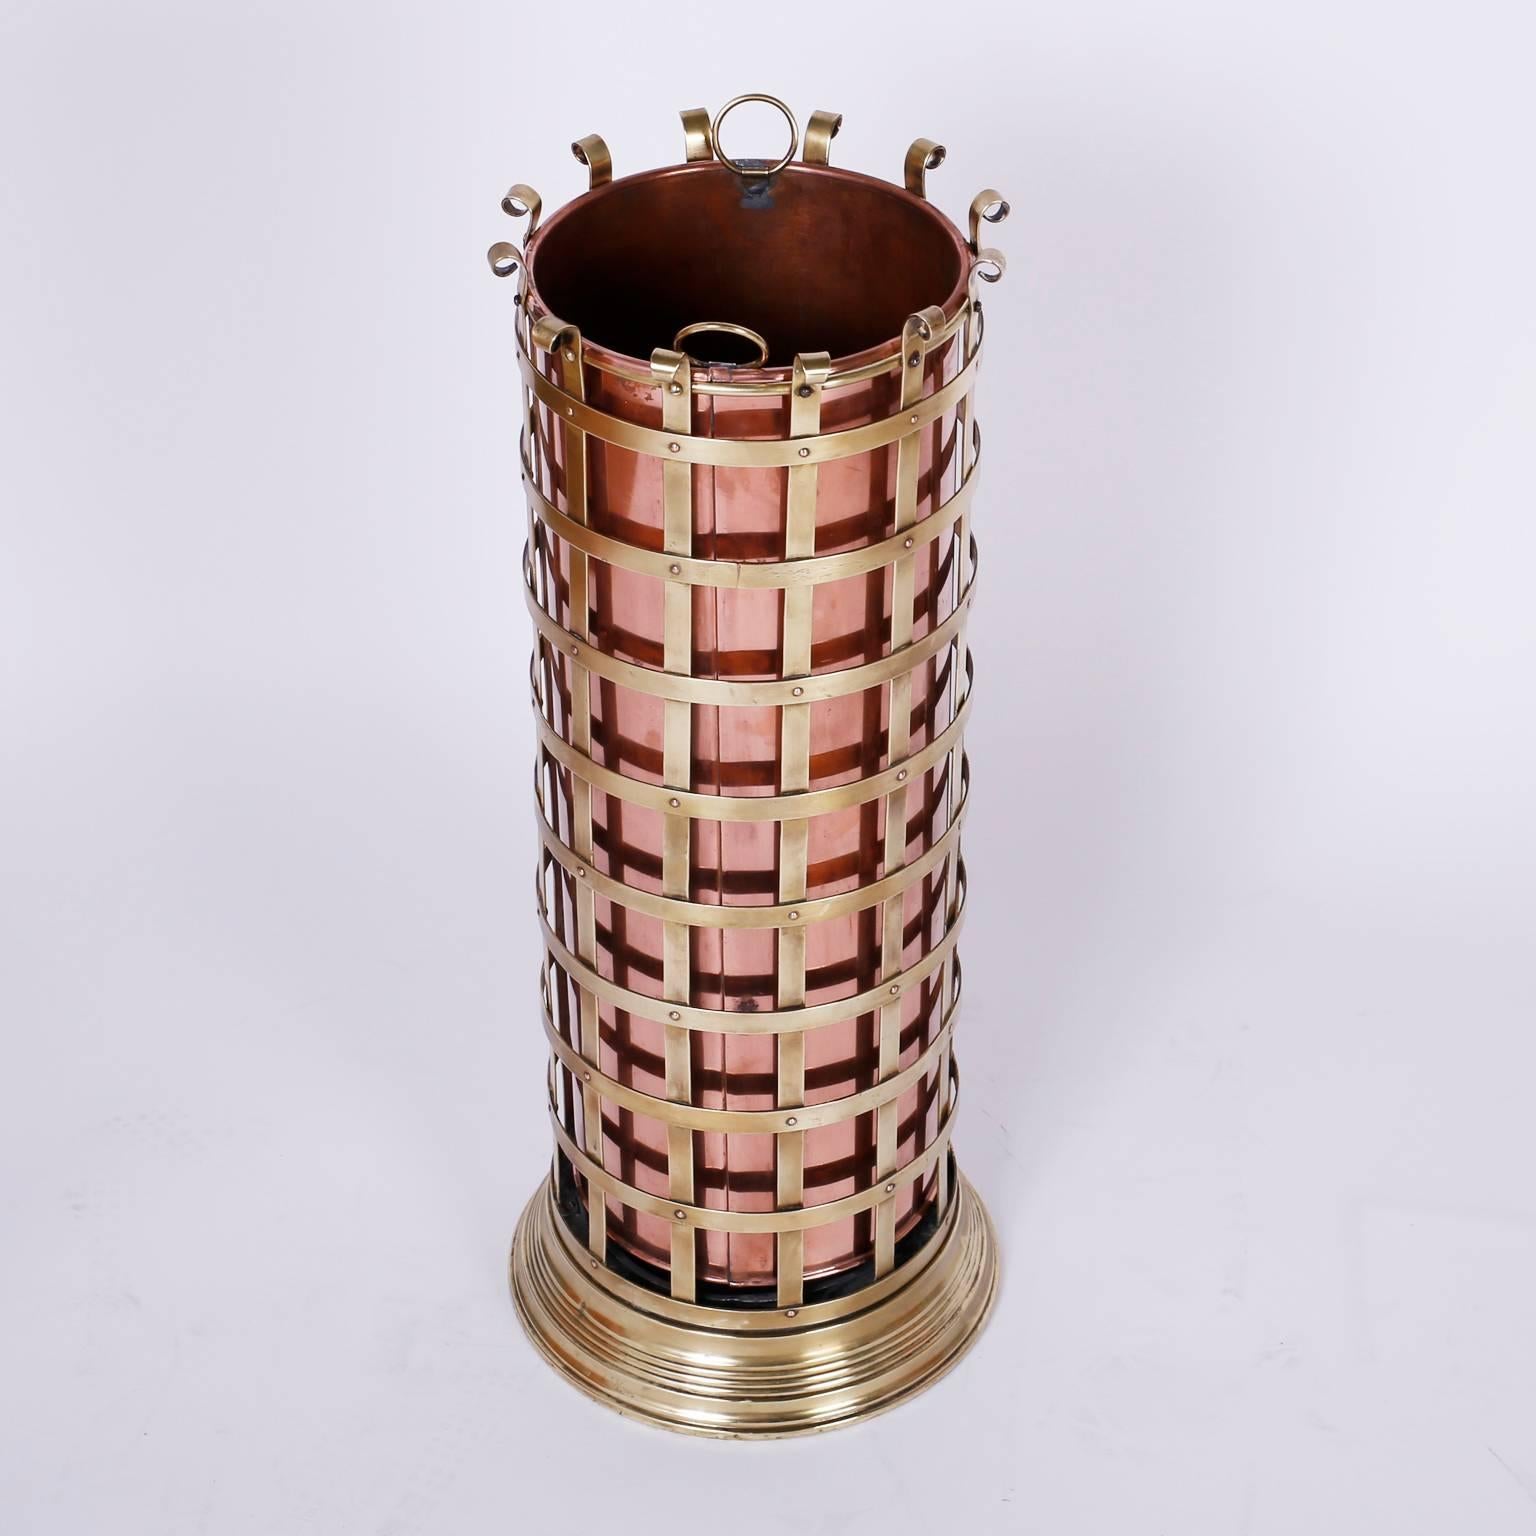 Arts & Crafts or Mission style mixed metal umbrella stand with a brass
case and copper canister insert. All hand polished and lacquered for
easy care.